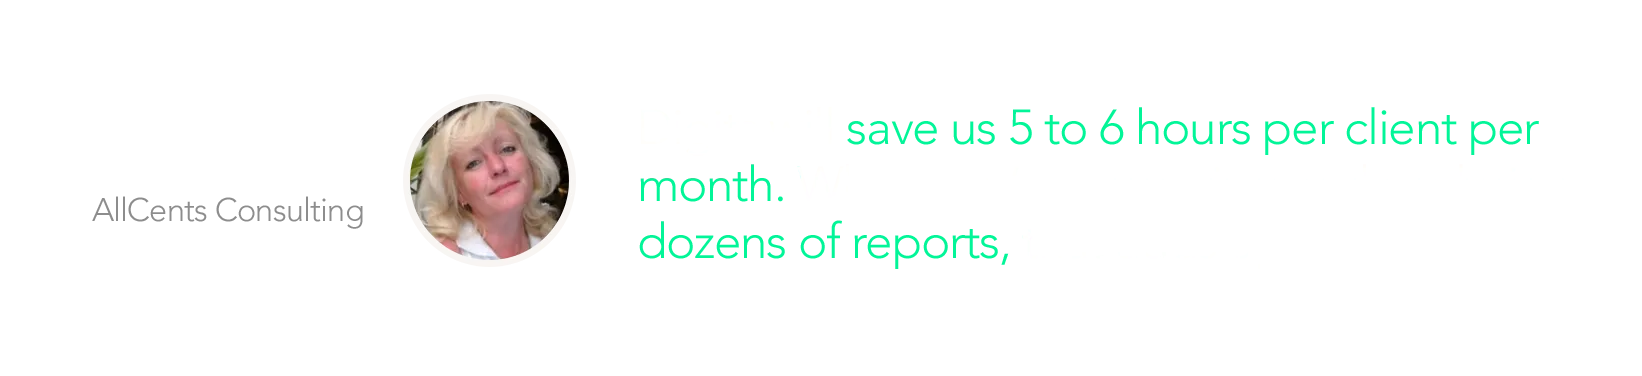 Digits will save us 5 to 6 hours per client per month. When you're preparing an analyzing dozens of reports, that adds up fast. - Jackie Anthony AllCents Consulting